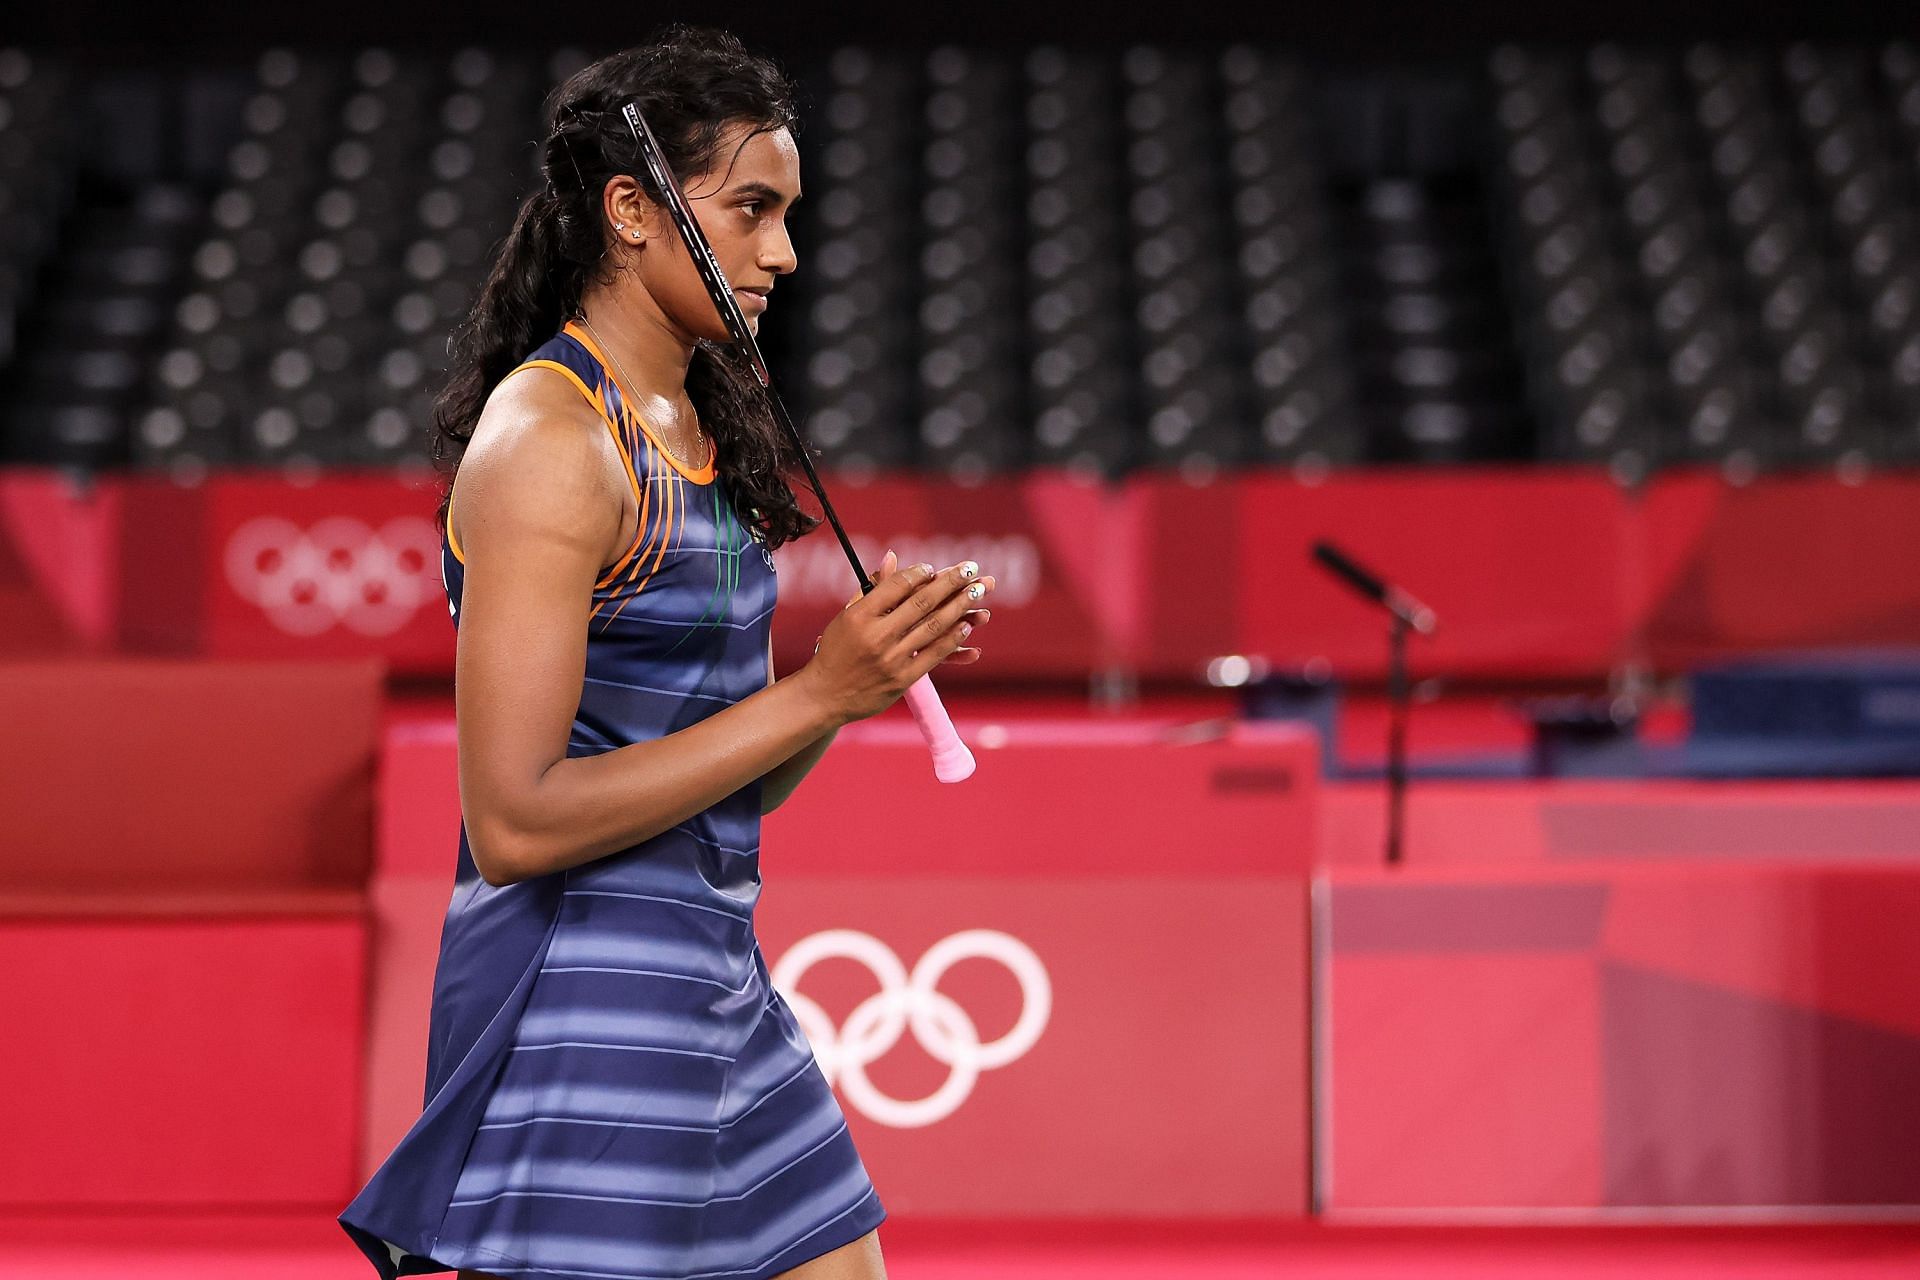 BWF World Tour Finals 2021, PV Sindhu vs Line Christophersen Where to watch, TV schedule, live stream details, and more